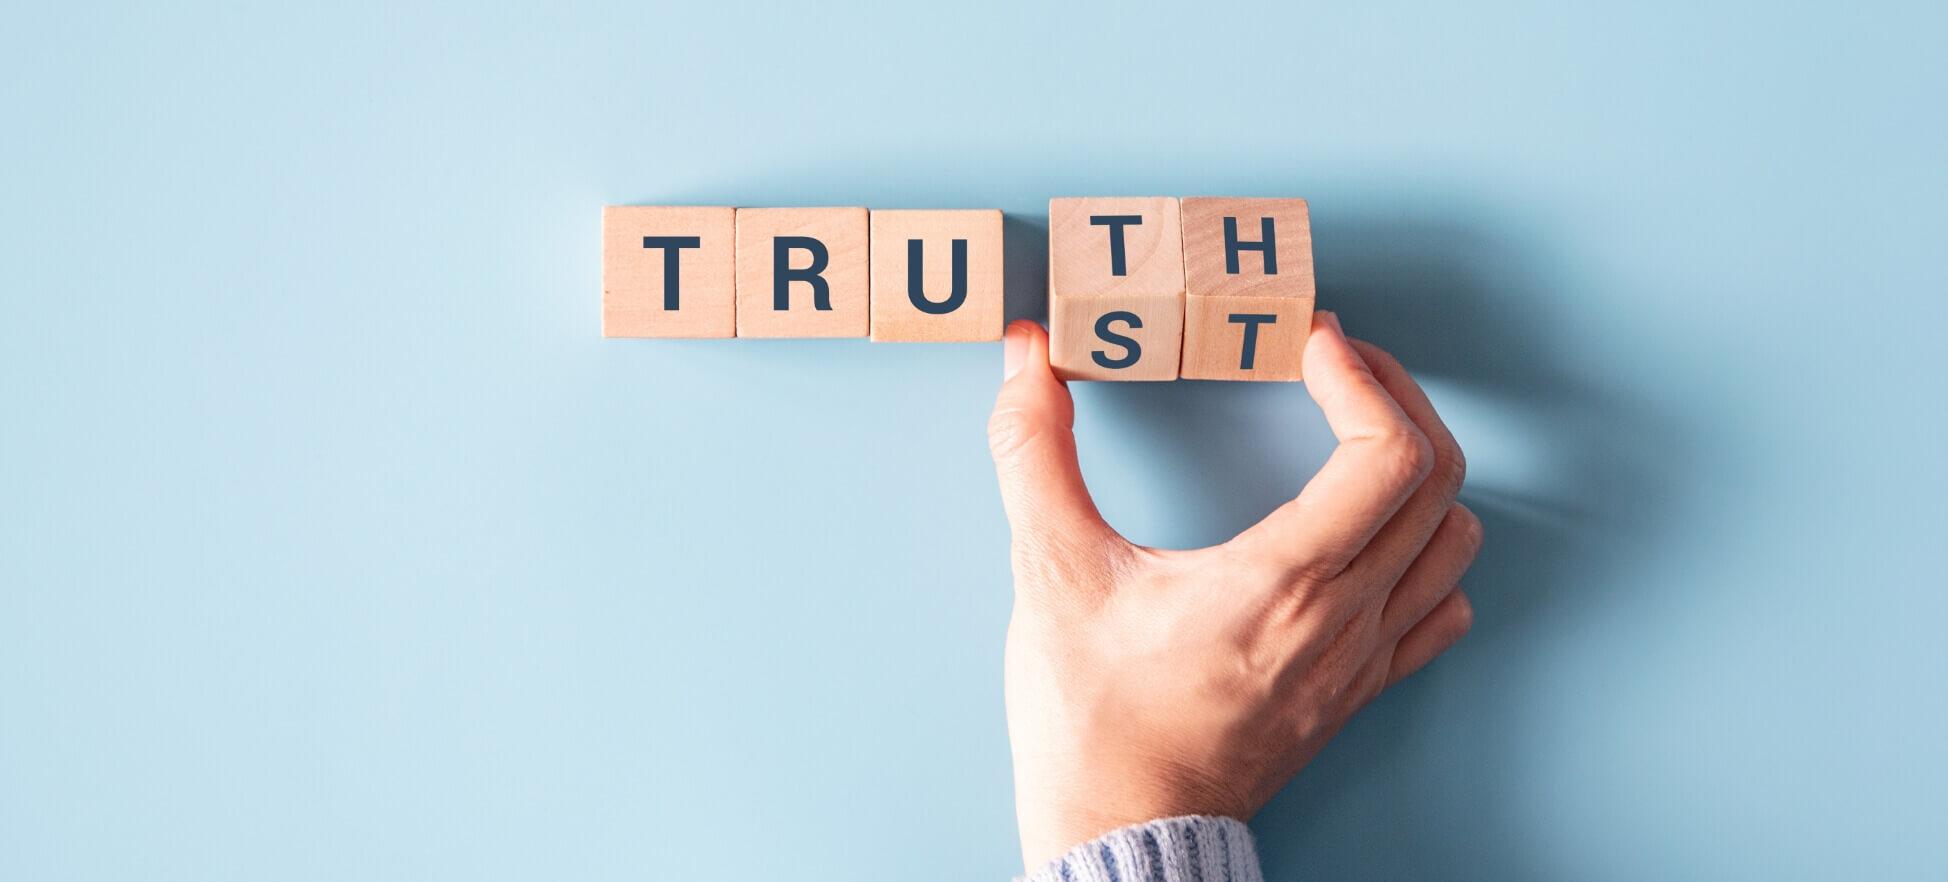 Blocks being adjusted to display "truth" instead of "trust"